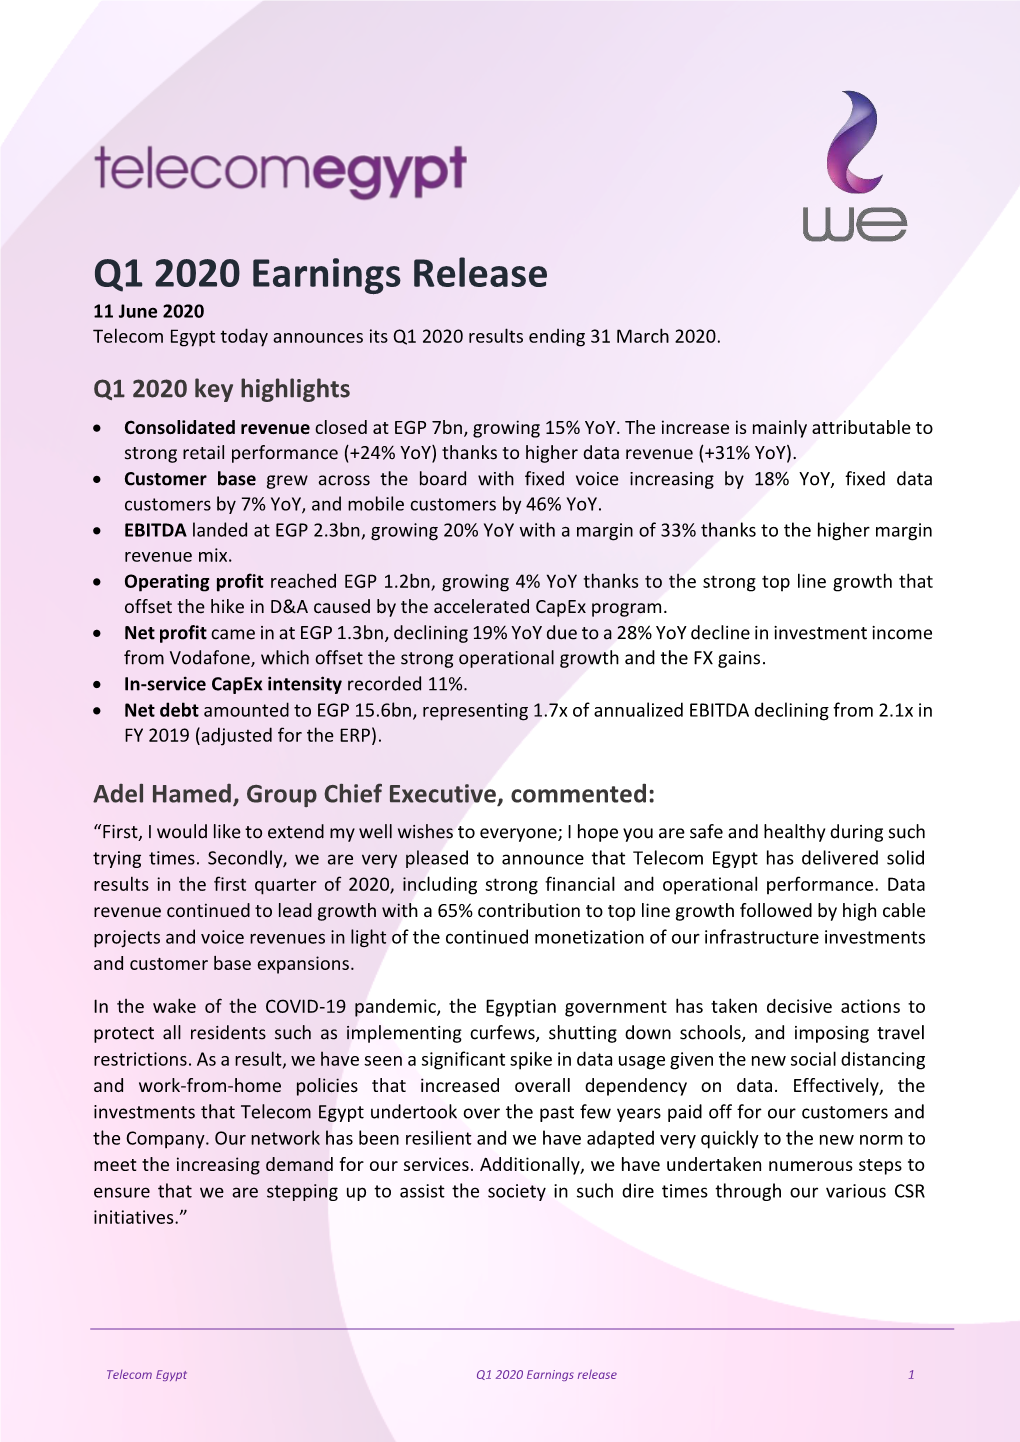 Q1 2020 Earnings Release 11 June 2020 Telecom Egypt Today Announces Its Q1 2020 Results Ending 31 March 2020